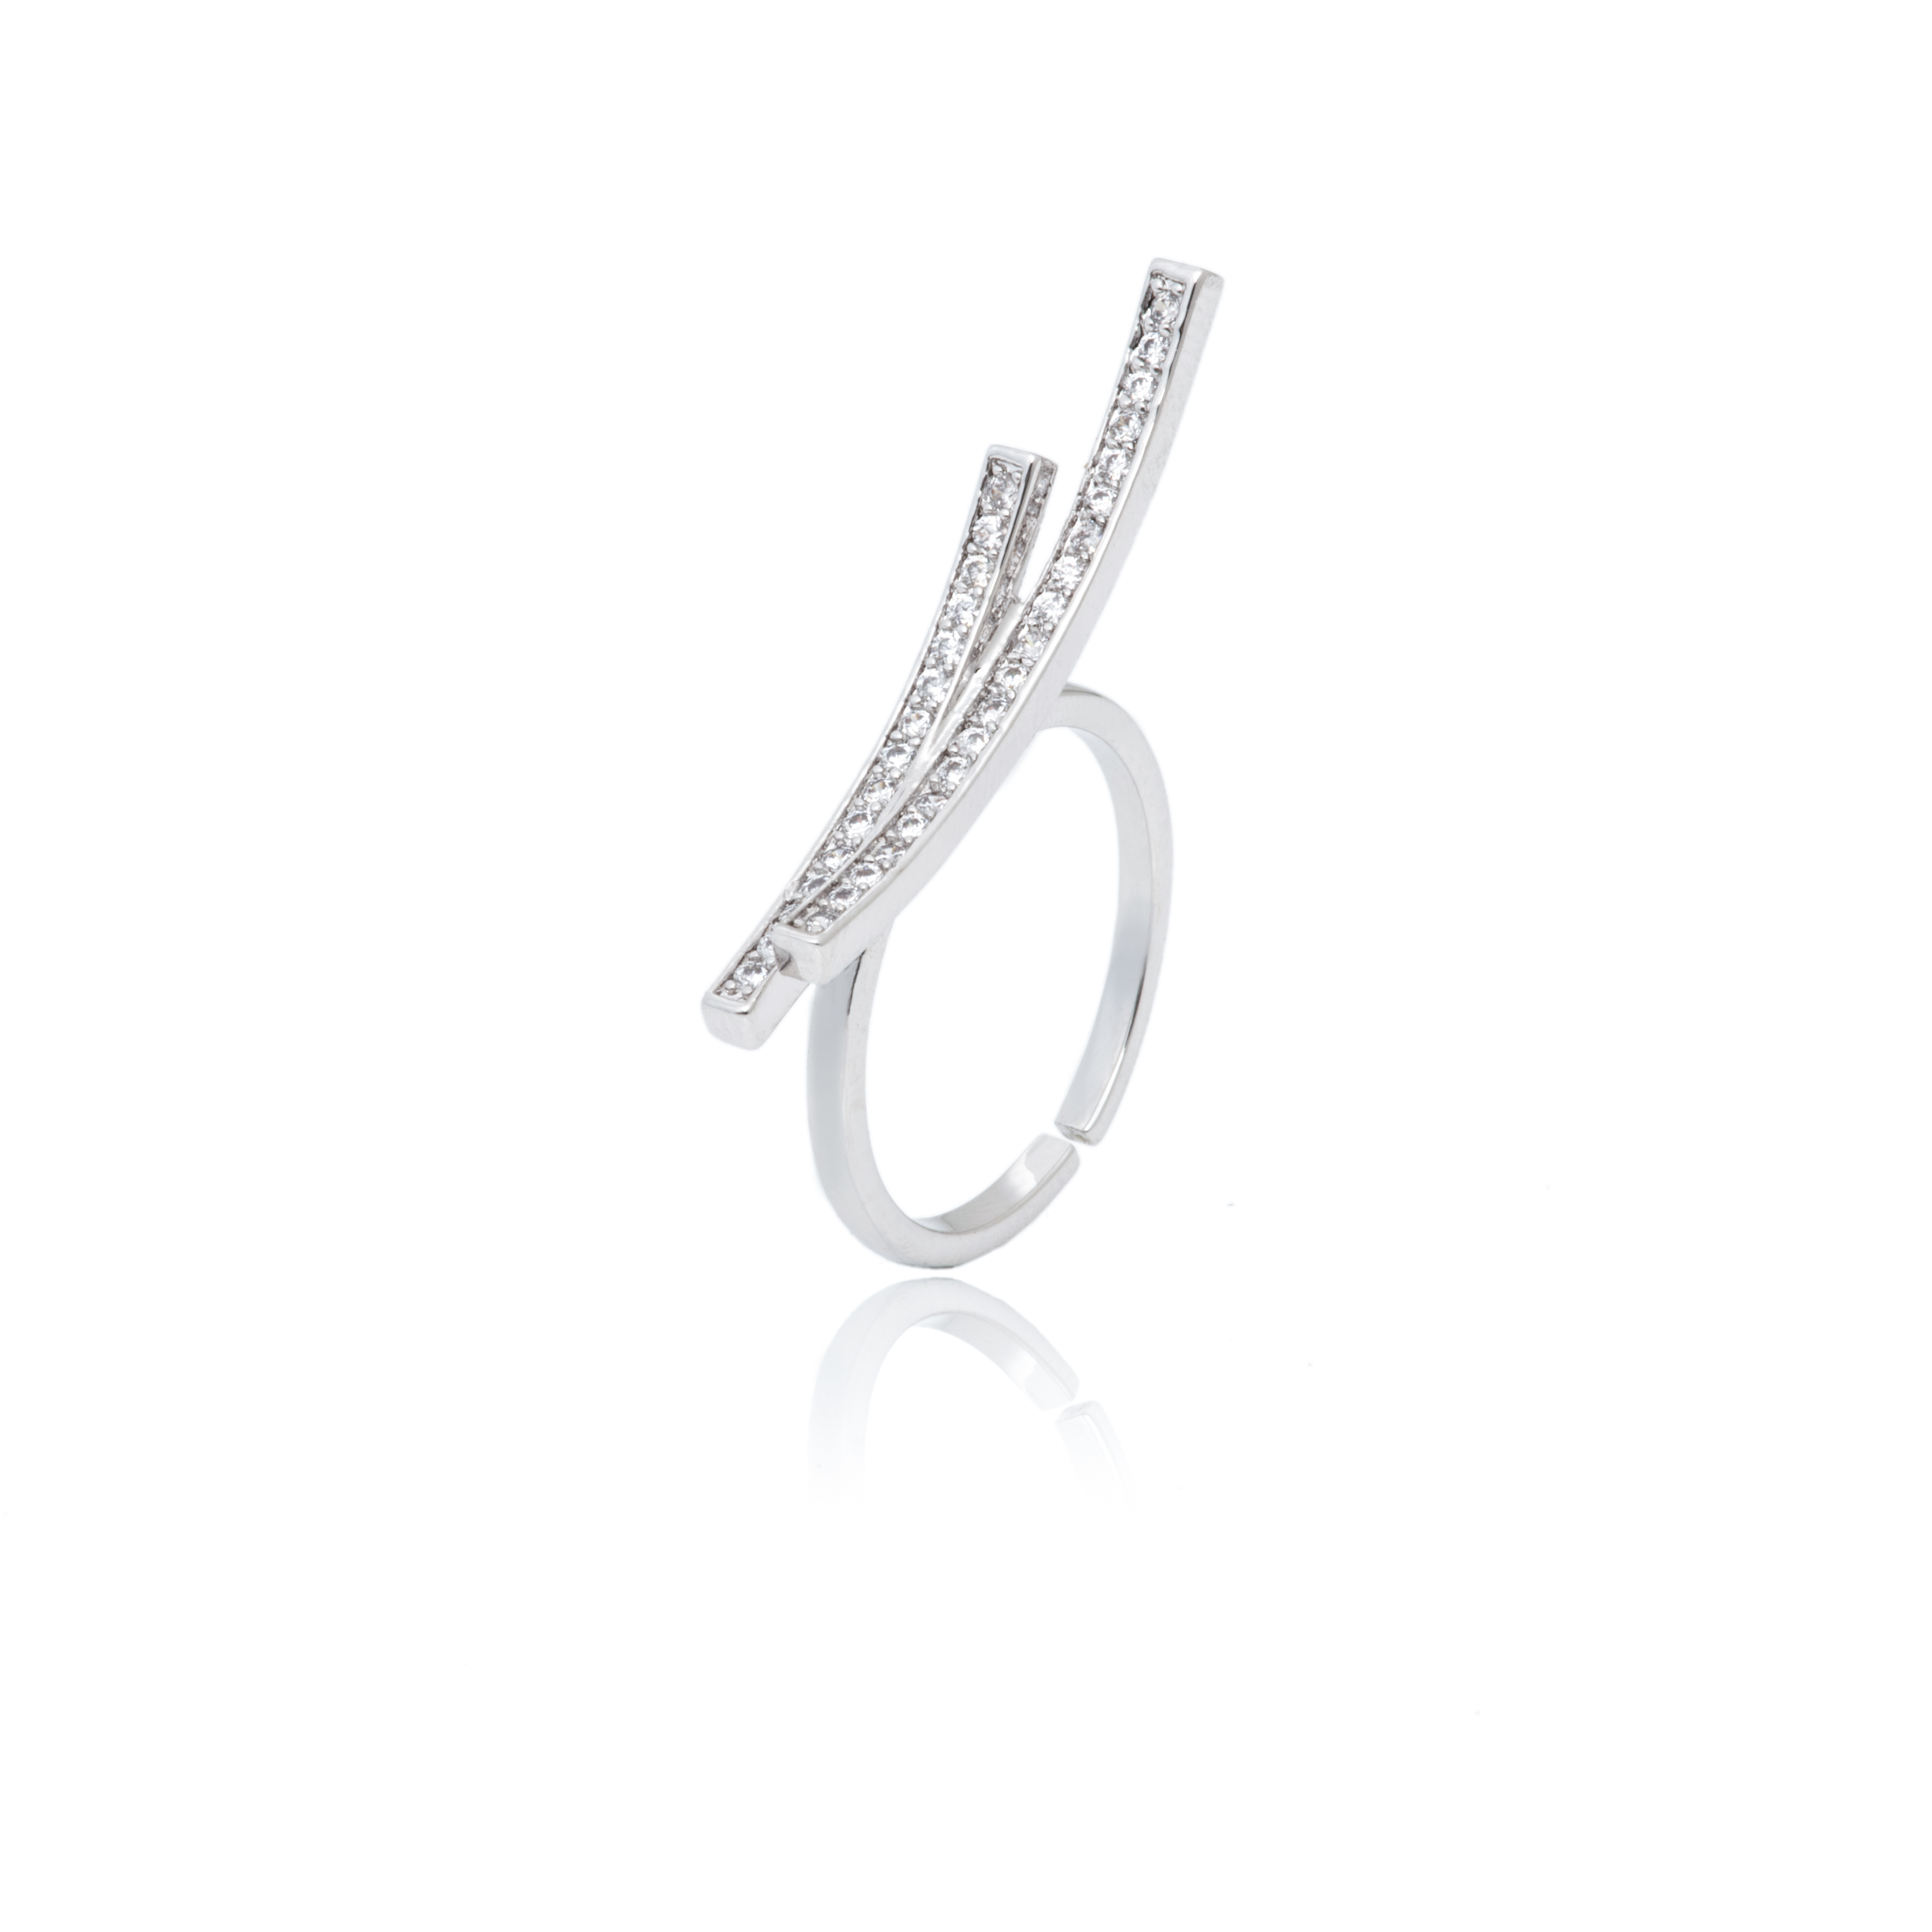 Starry Track Ring 1 piece